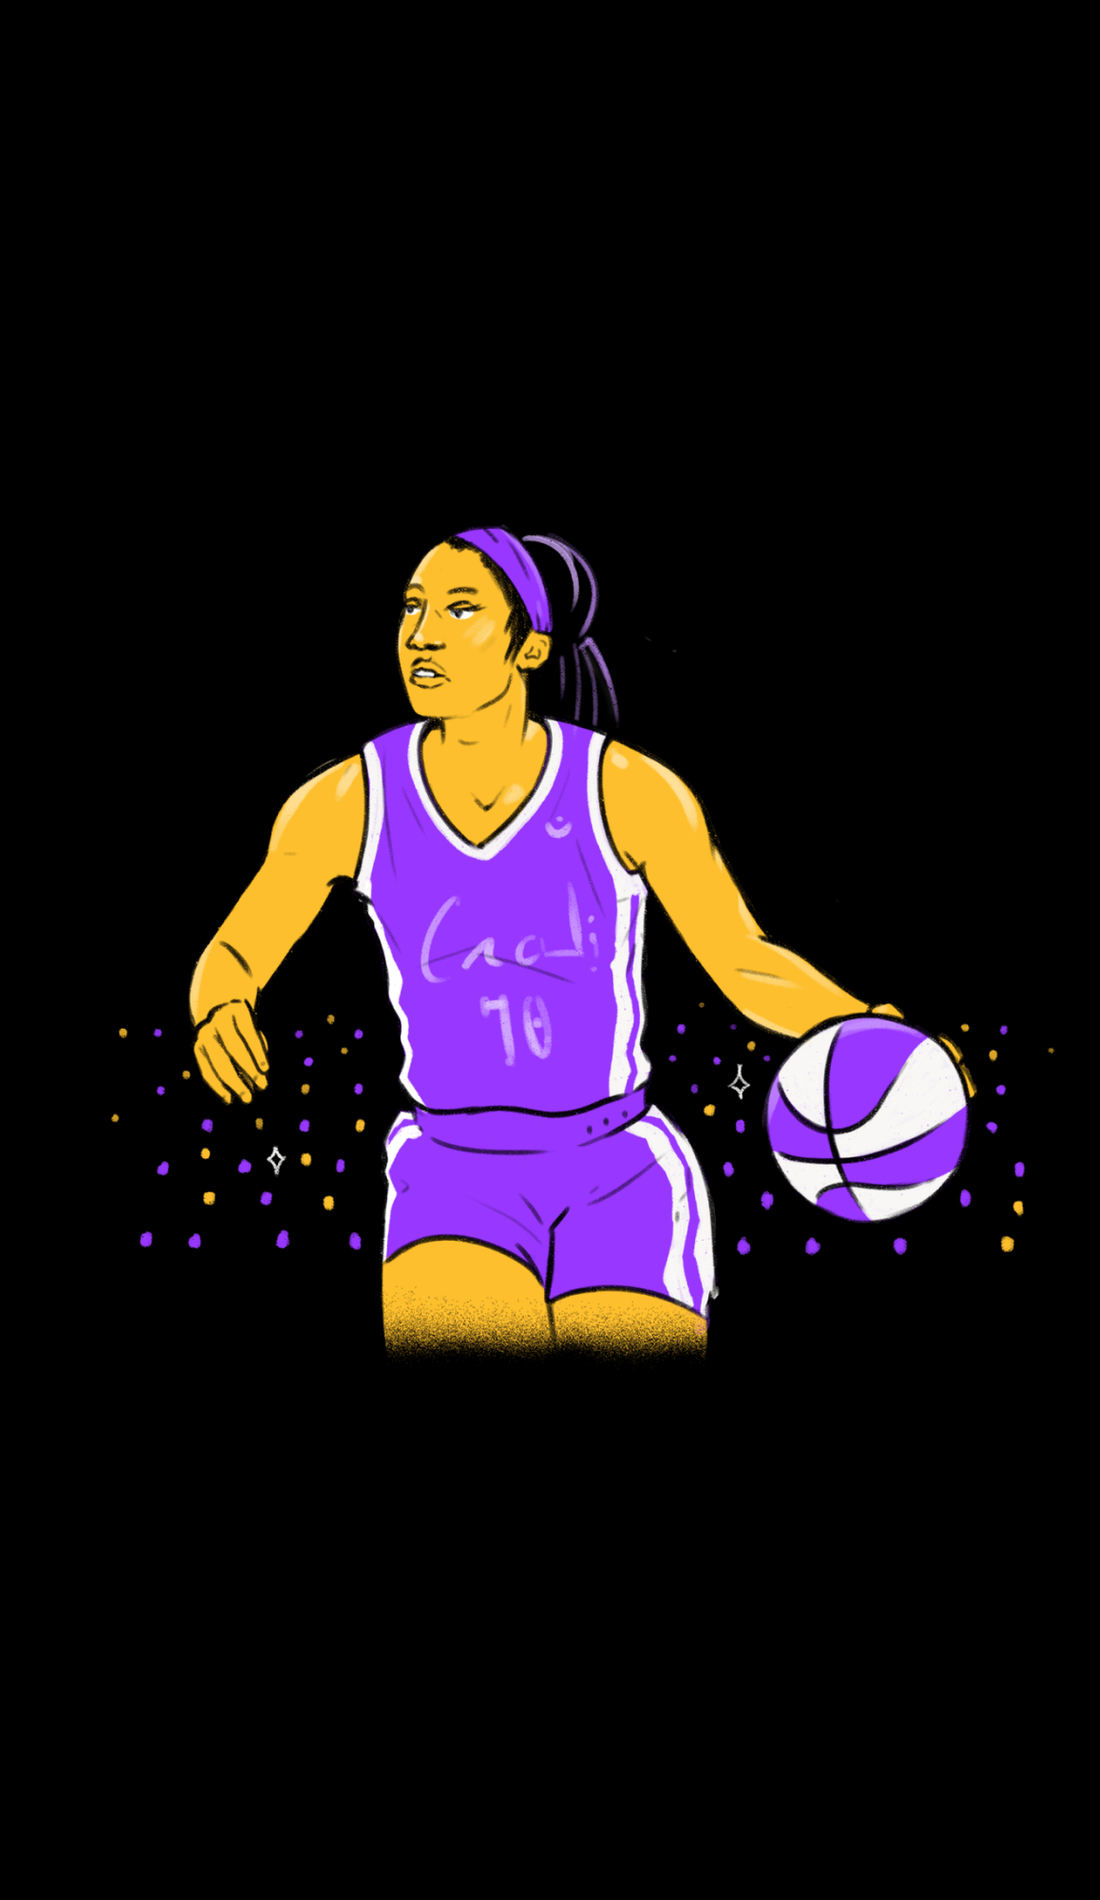 A Basketball Hall of Fame Women's Challenge live event